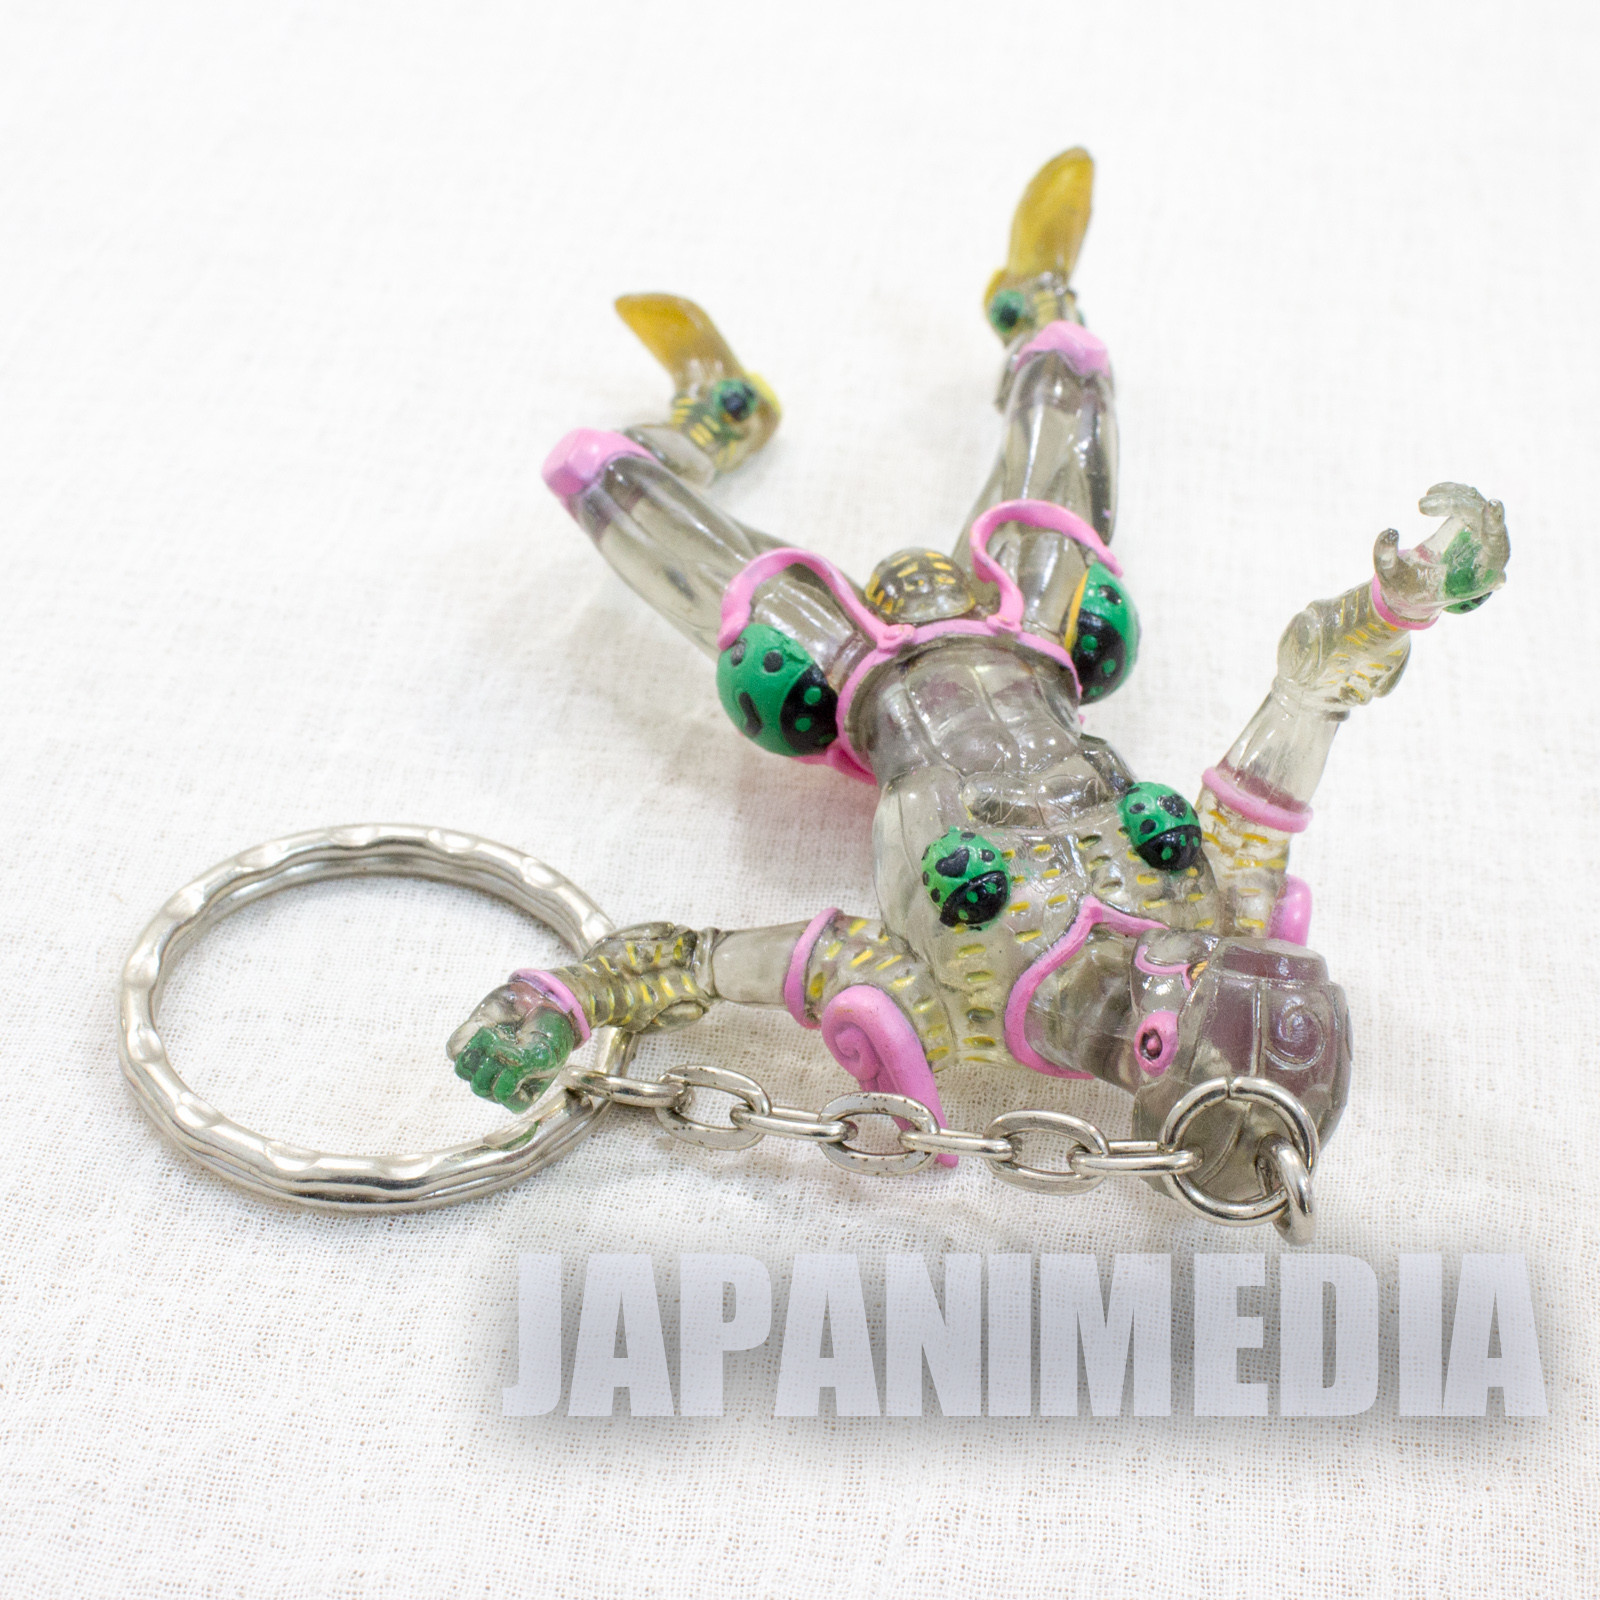 JoJo's Bizarre Adventure Part 5 Gold Experience Stand collection Figure Keychain JAPAN ANIME